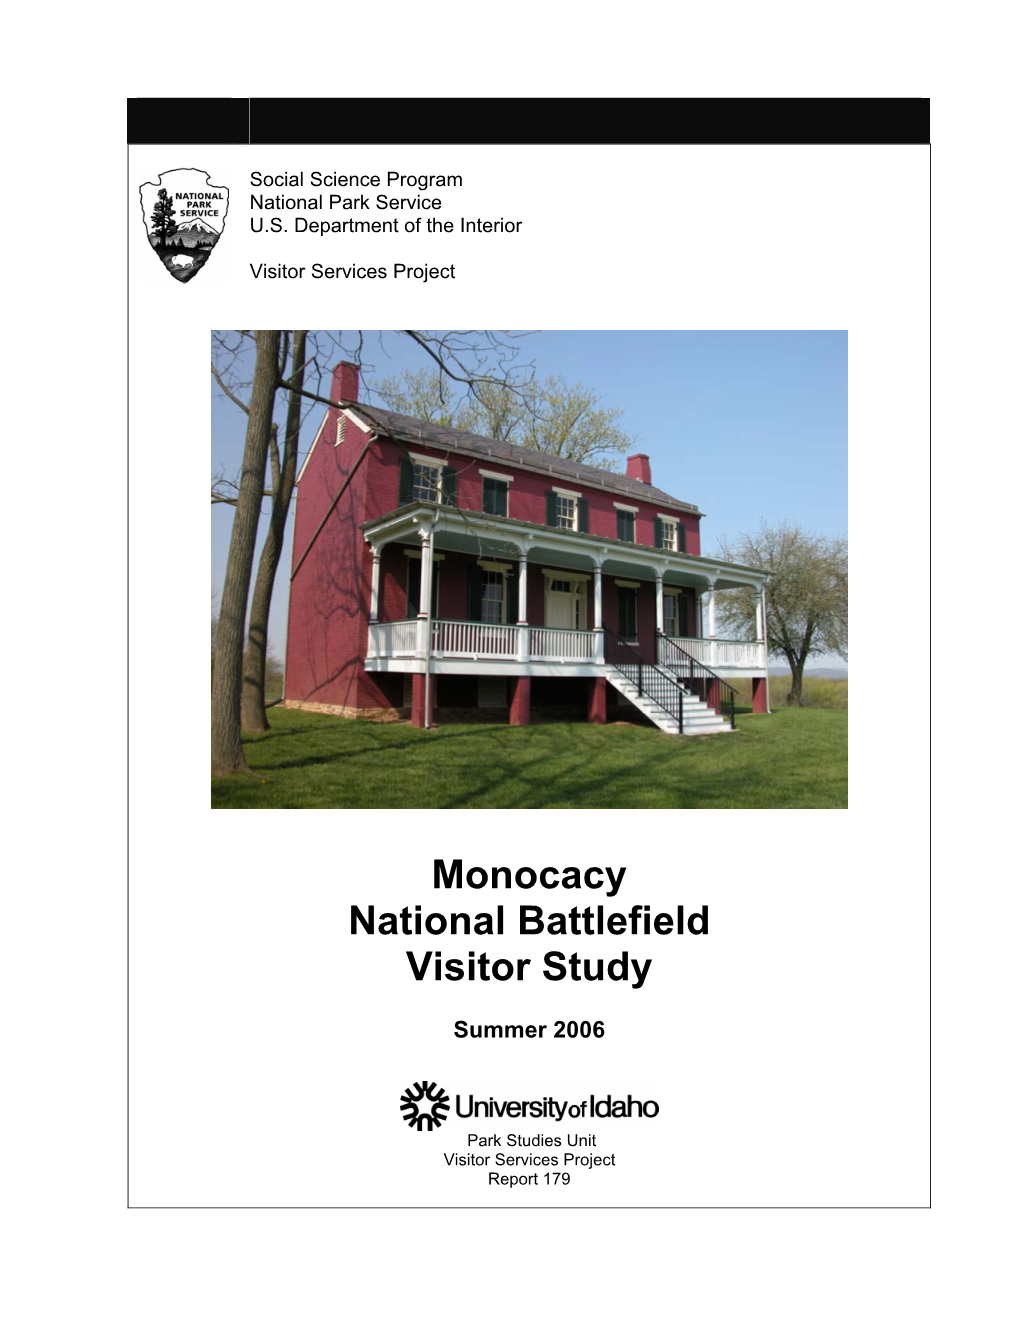 Monocacy National Battlefield Visitor Study